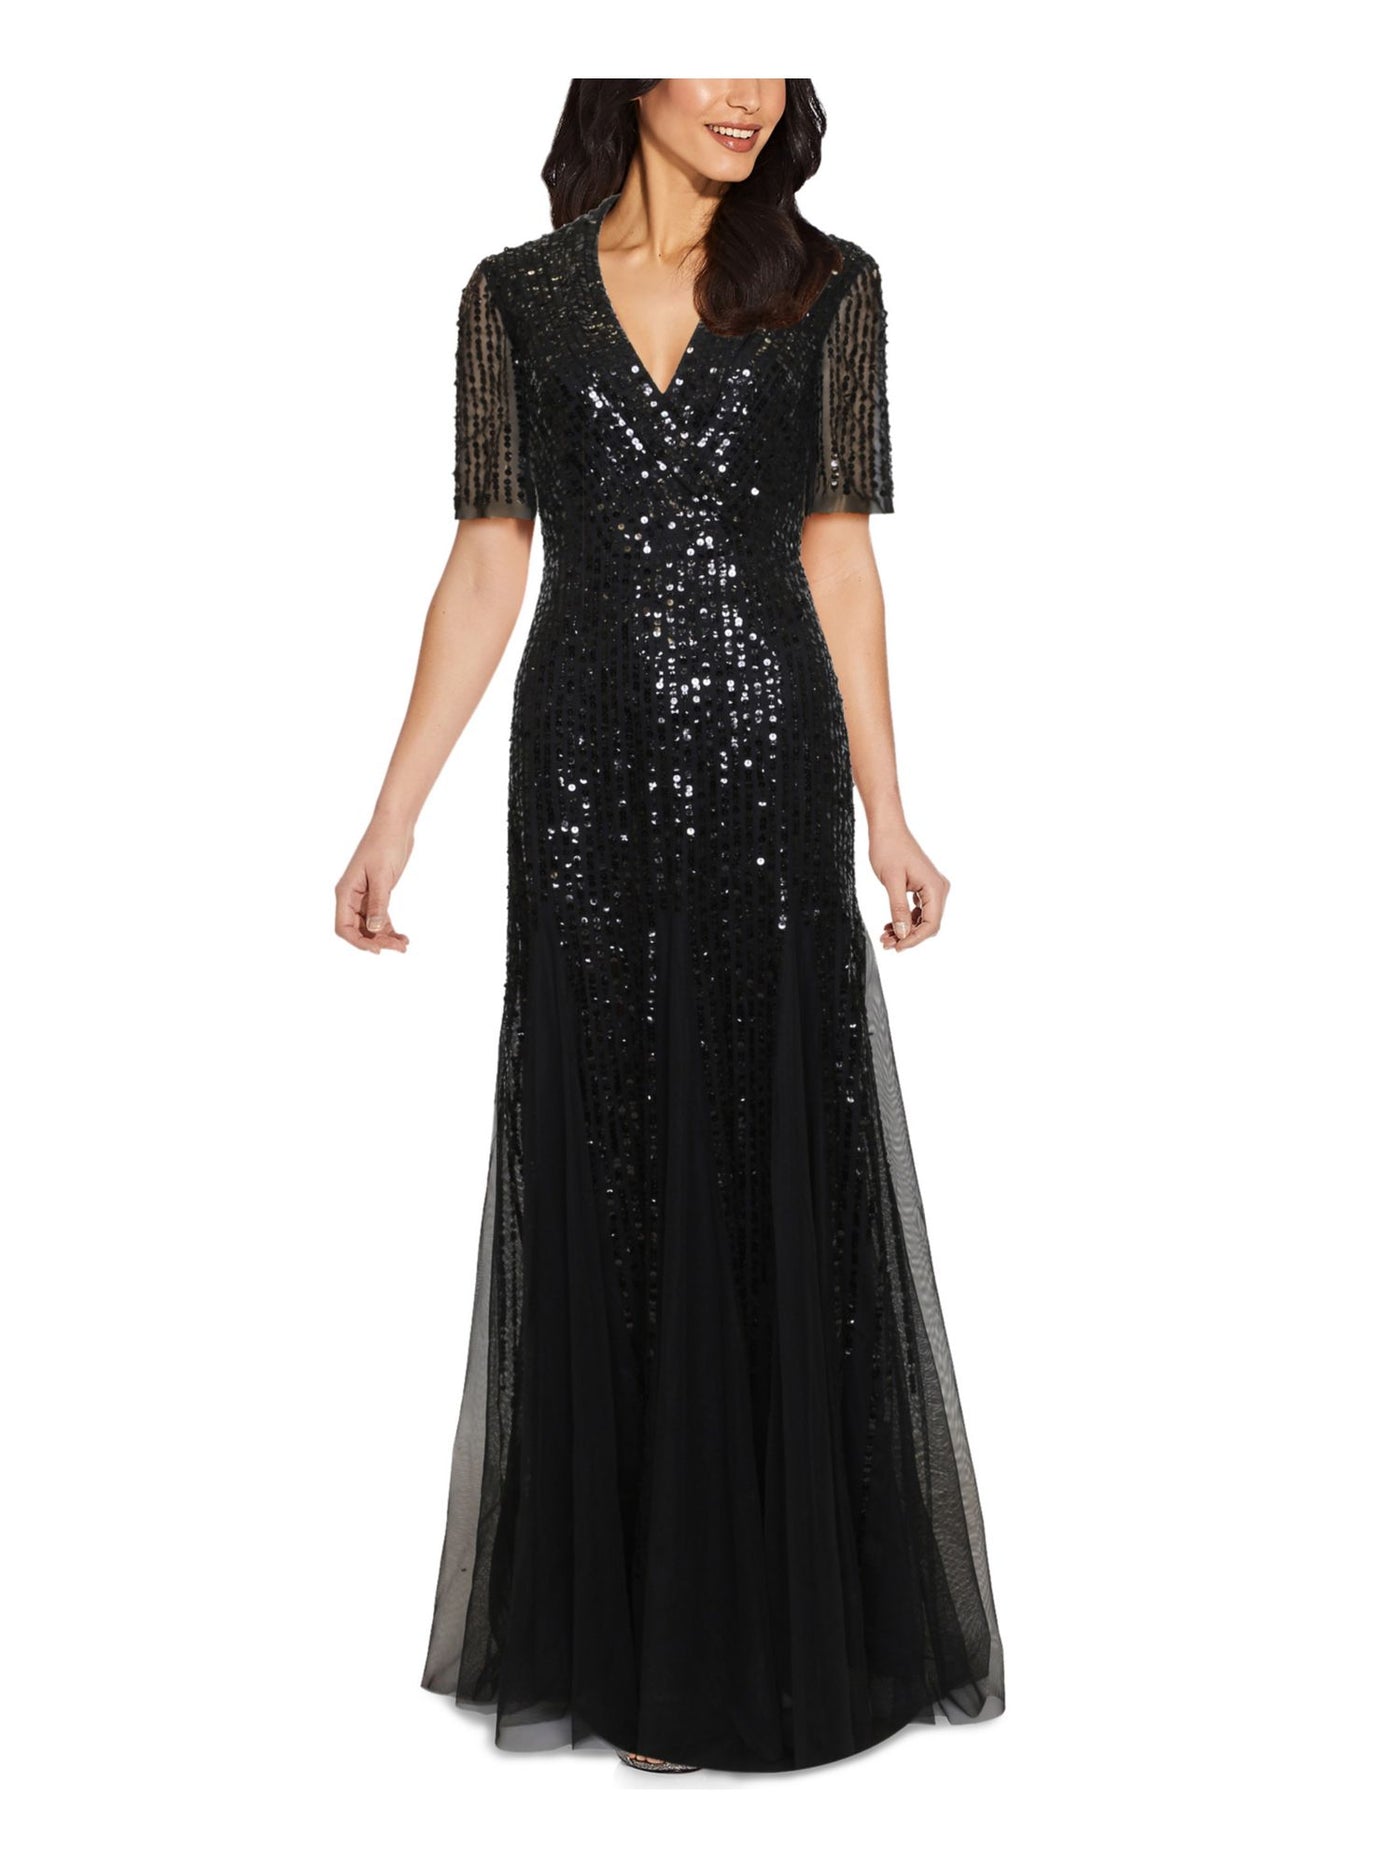 ADRIANNA PAPELL Womens Black Sequined Fitted Tuxedo Style Illusion Godets Short Sleeve V Neck Full-Length Formal Gown Dress 2